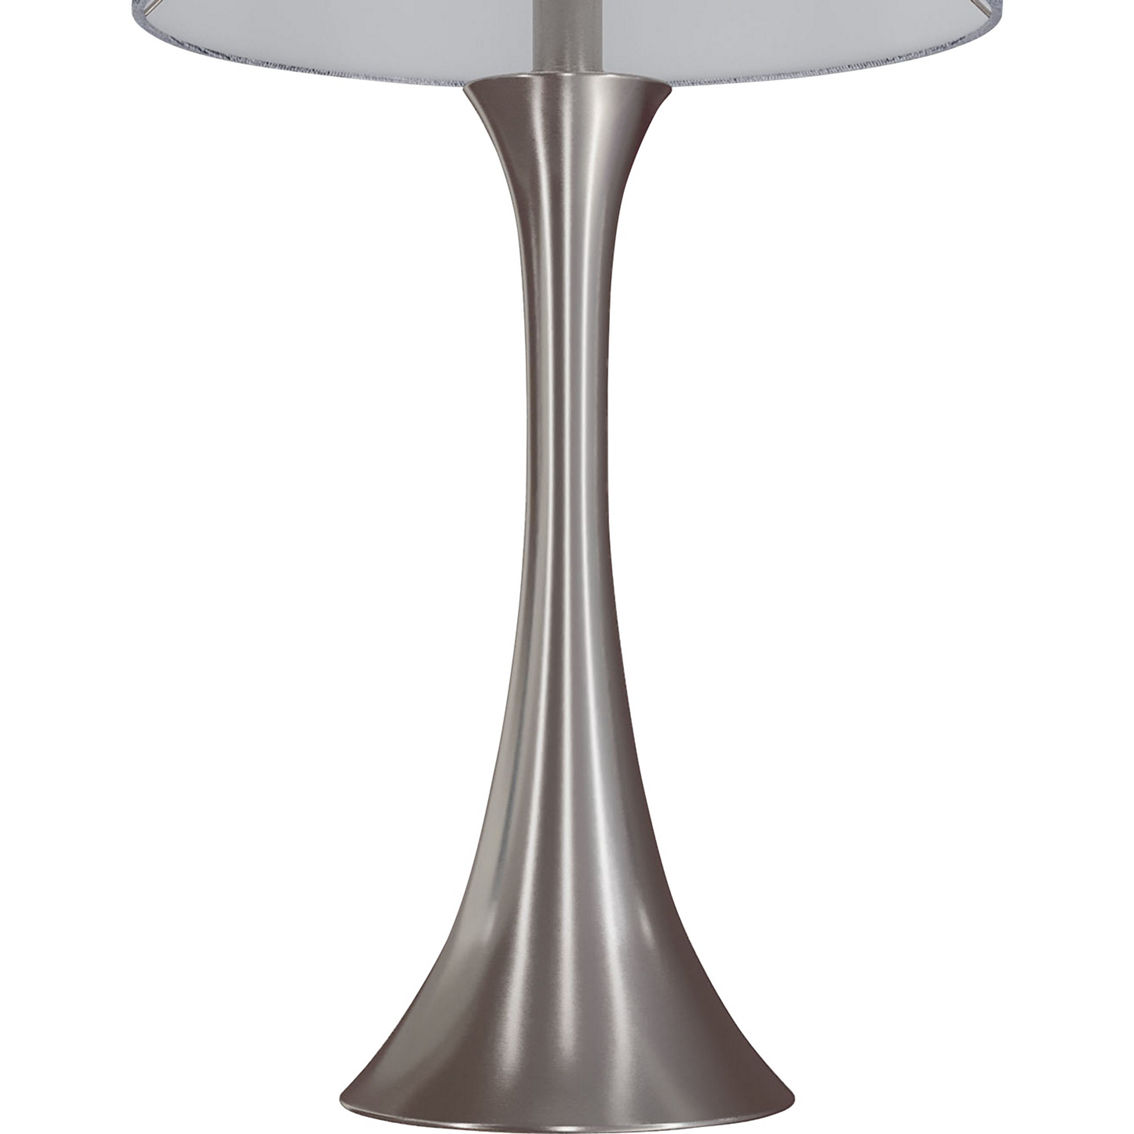 LumiSource Lenuxe 24.25 in. Metal Table Lamp 2 pk. - Image 6 of 9